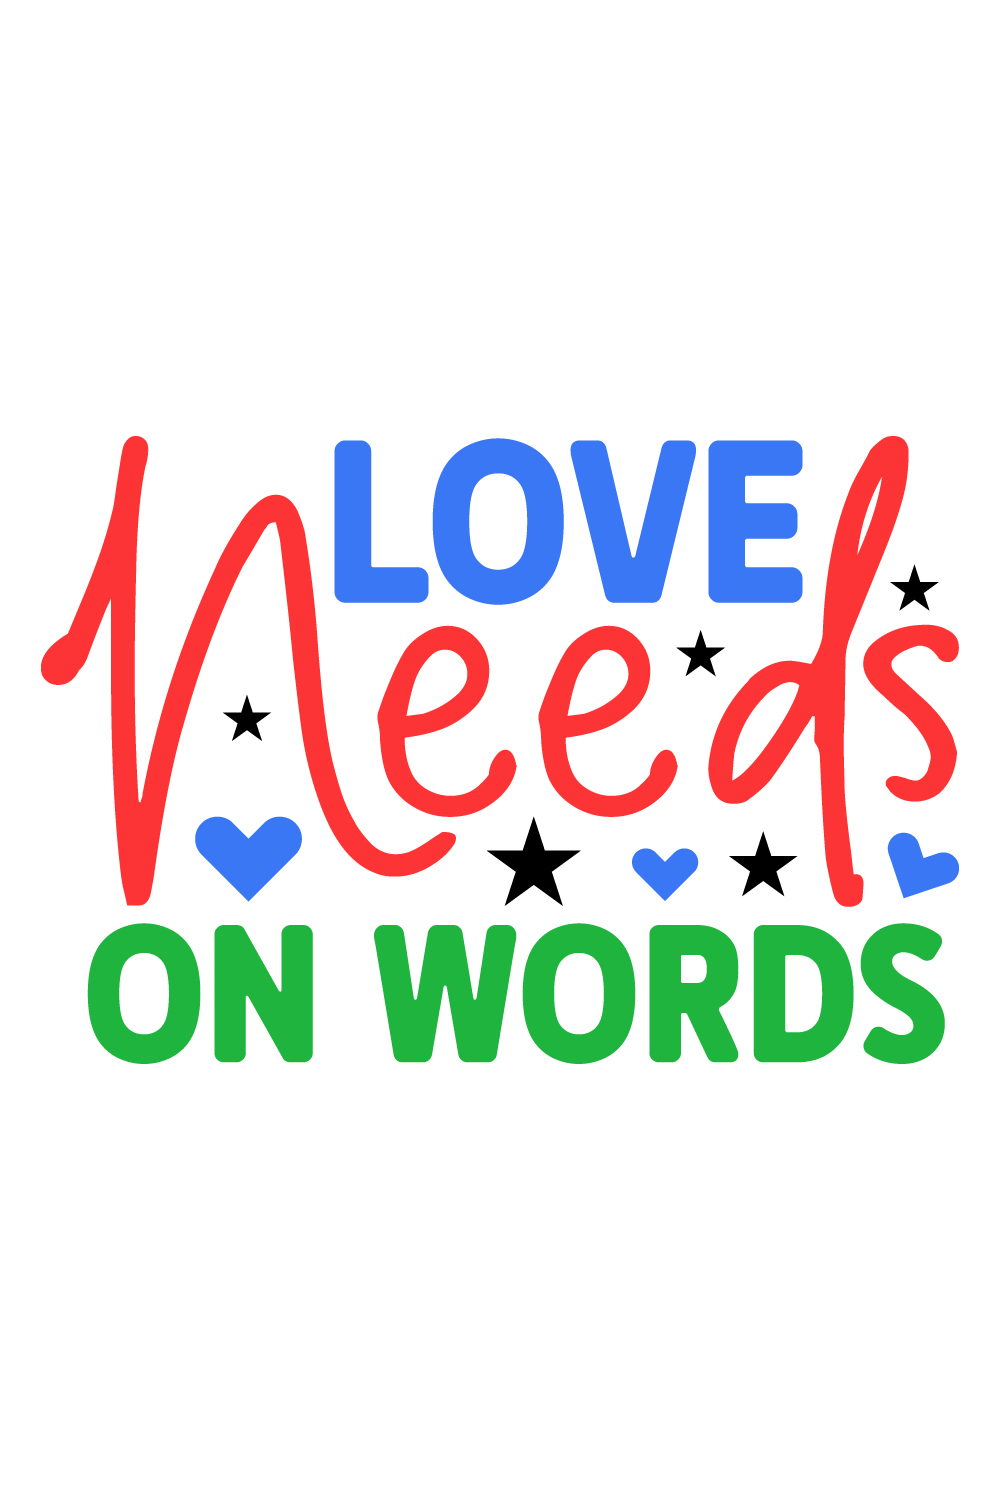 love needs on words pinterest preview image.